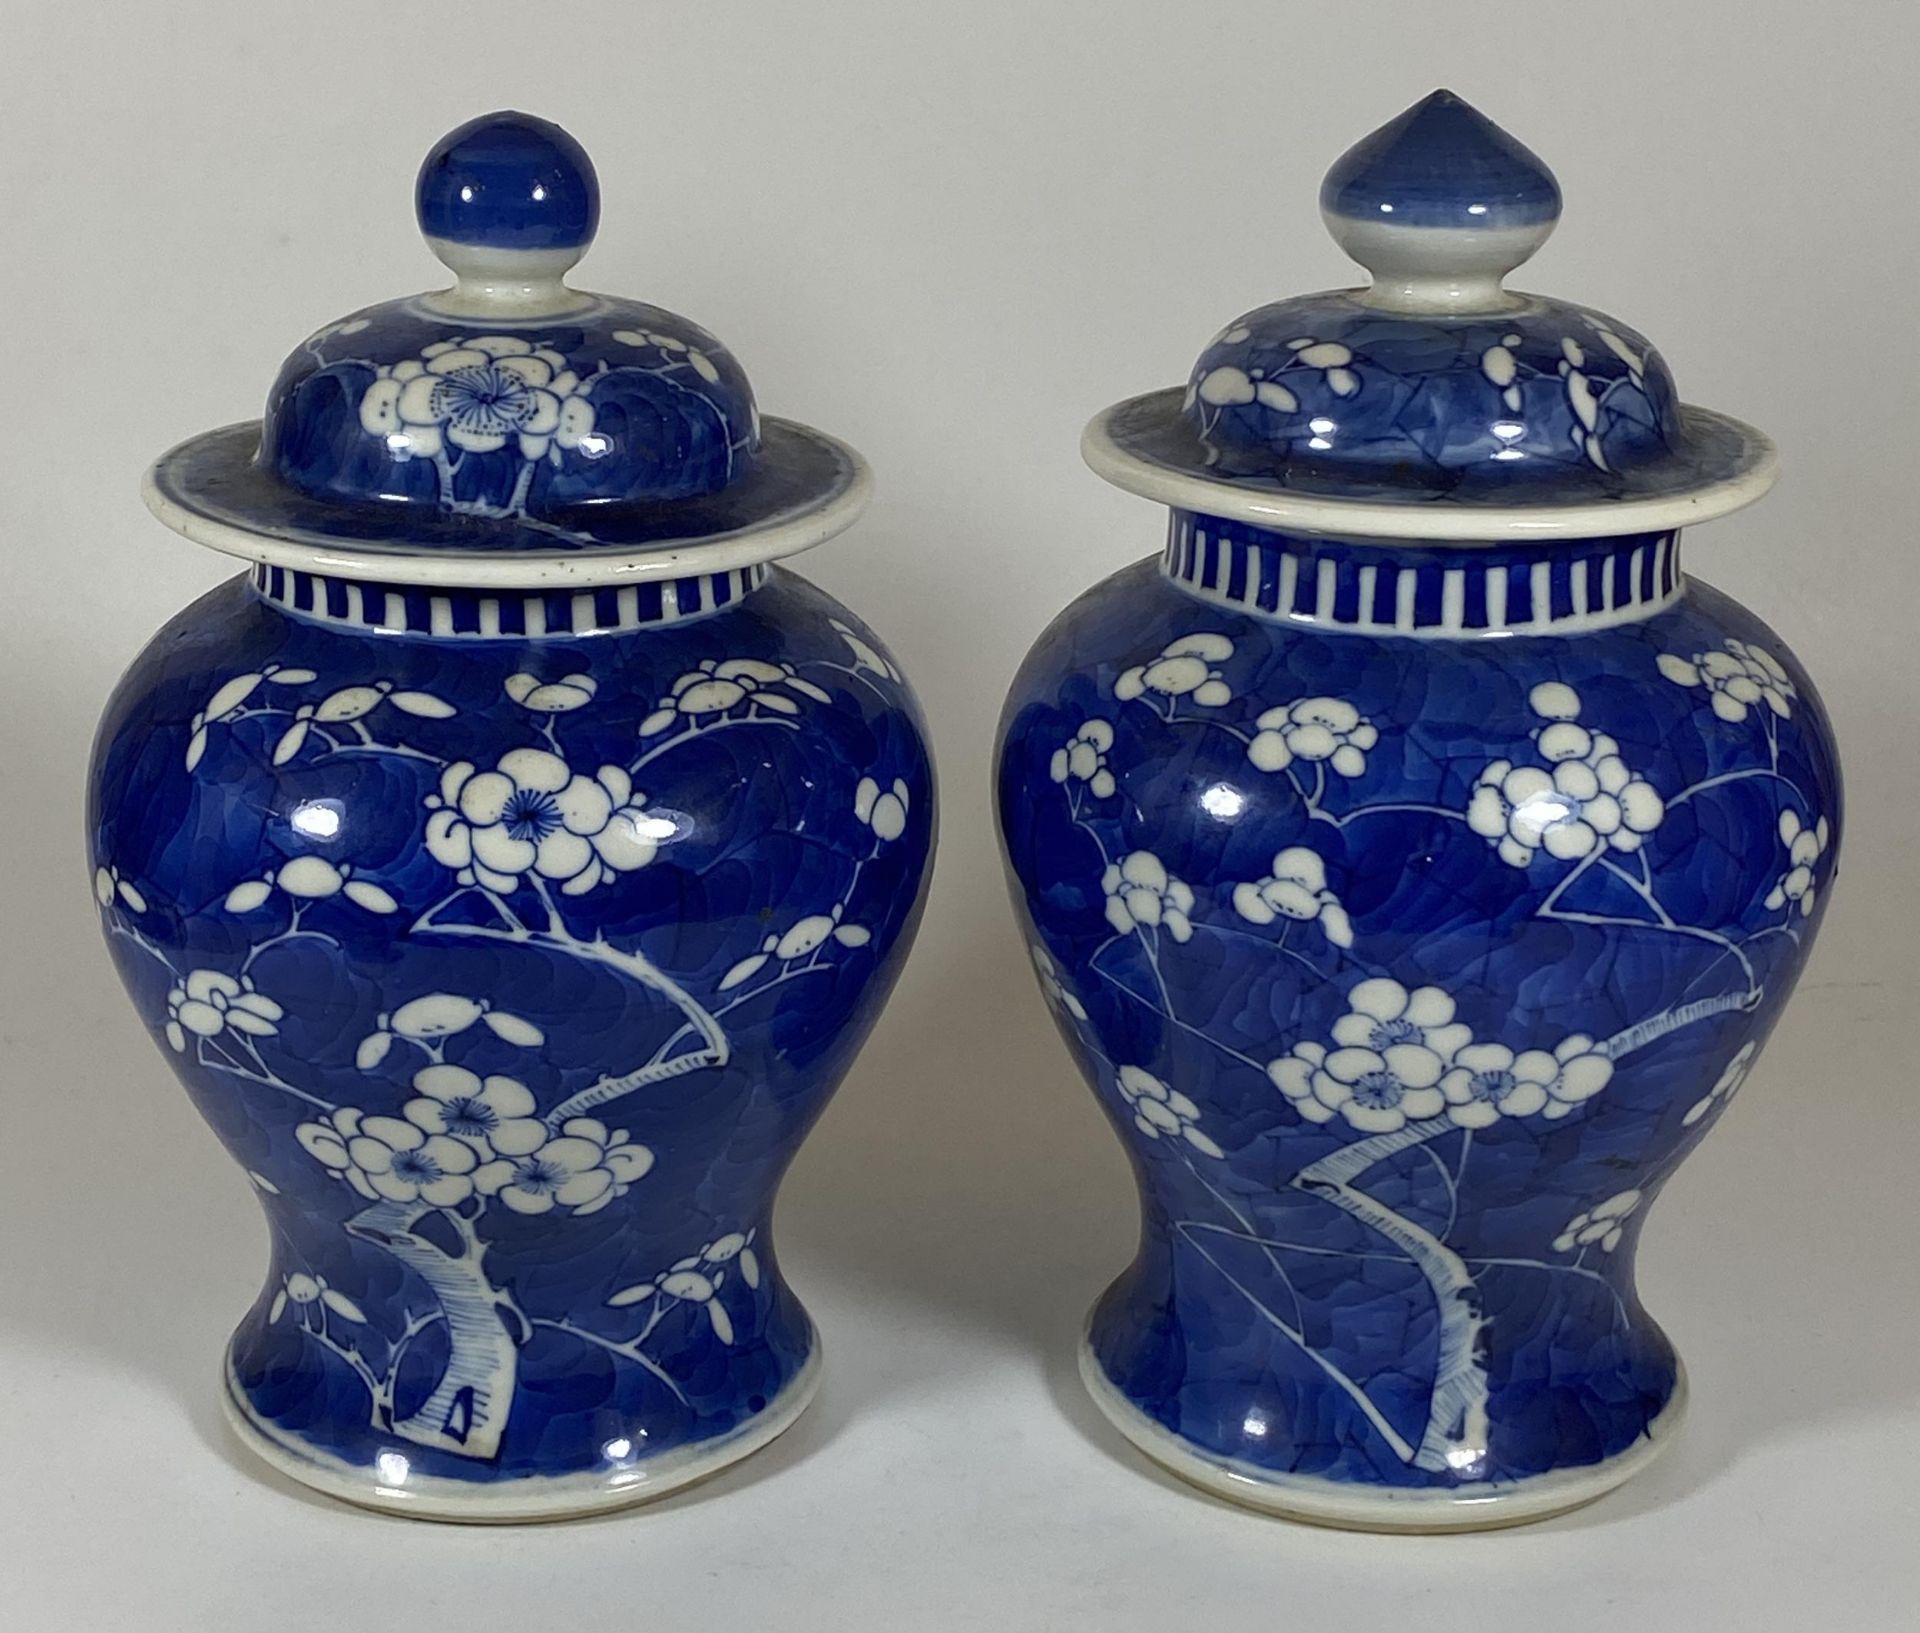 A PAIR OF 19TH/20TH CENTURY CHINESE BLUE AND WHITE PRUNUS BLOSSOM PATTERN PORCELAIN LIDDED TEMPLE